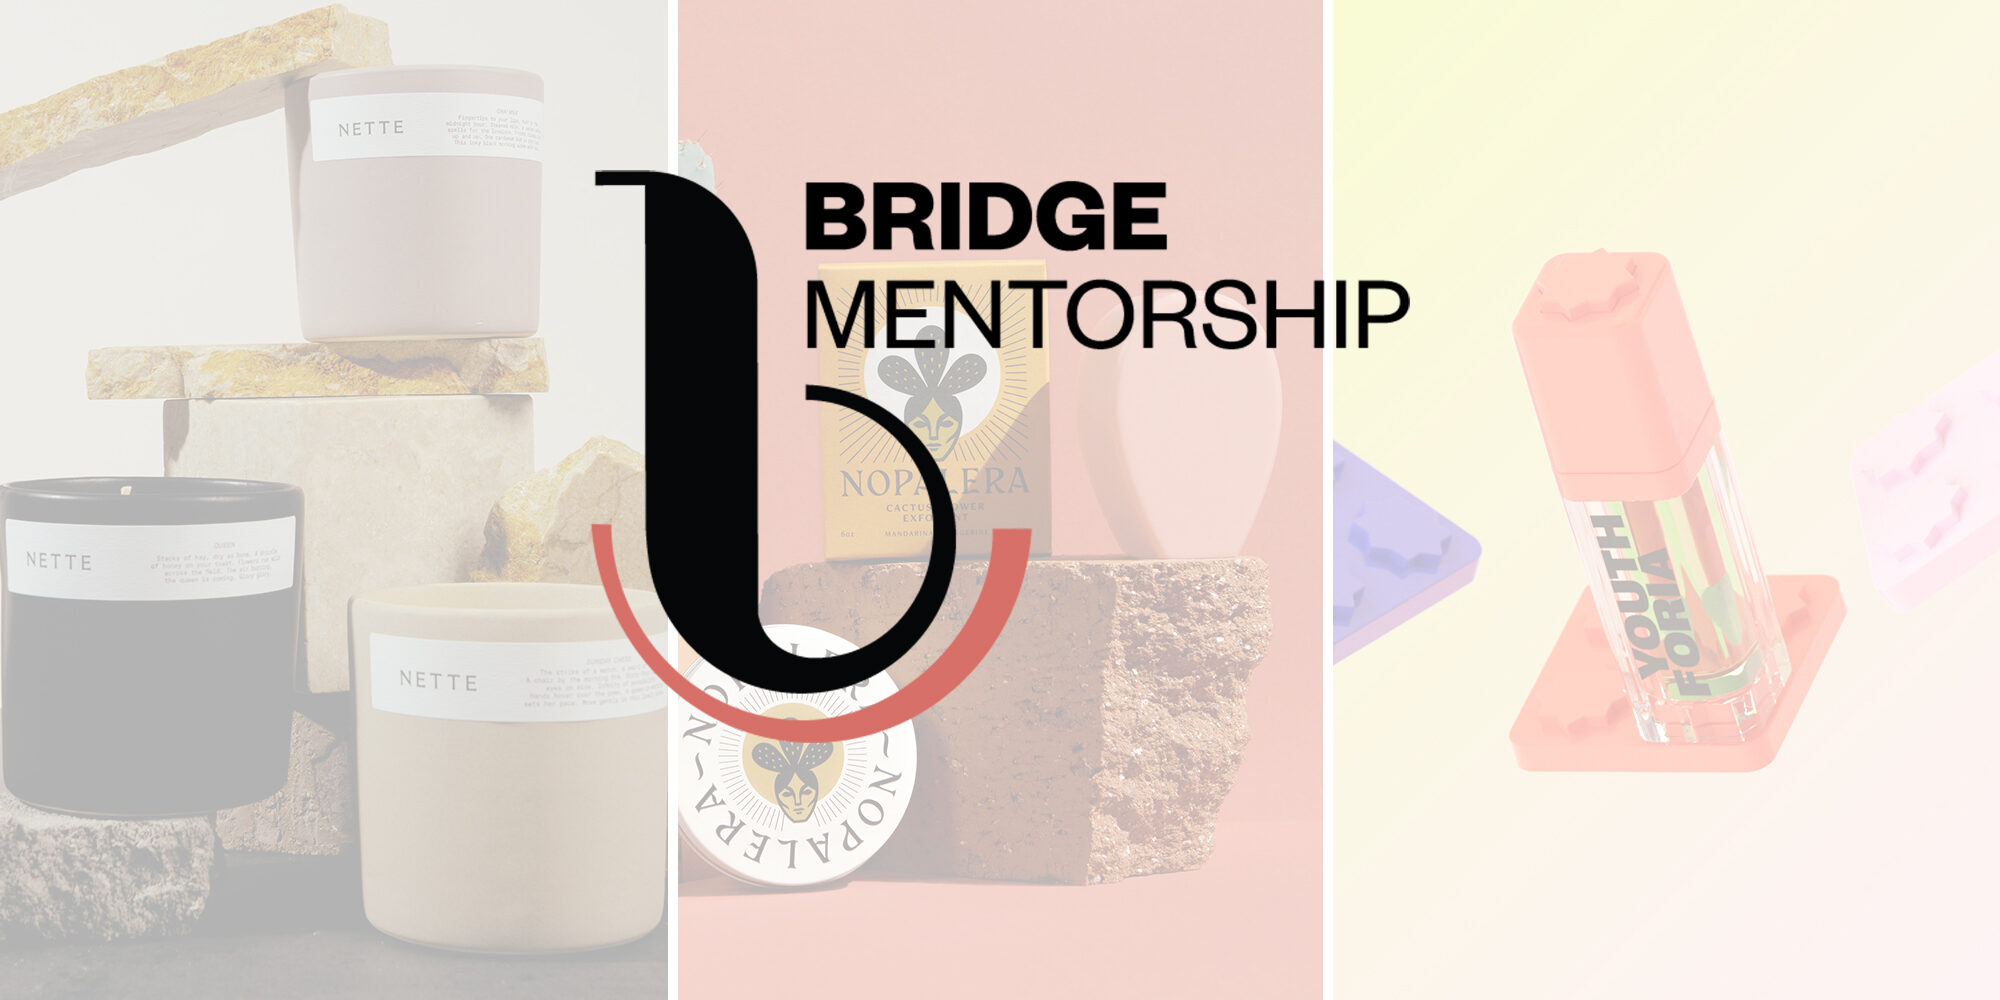 Bridge Mentorship Participants Share Knowledge They Gained From The Program; Applications Open For Second Round